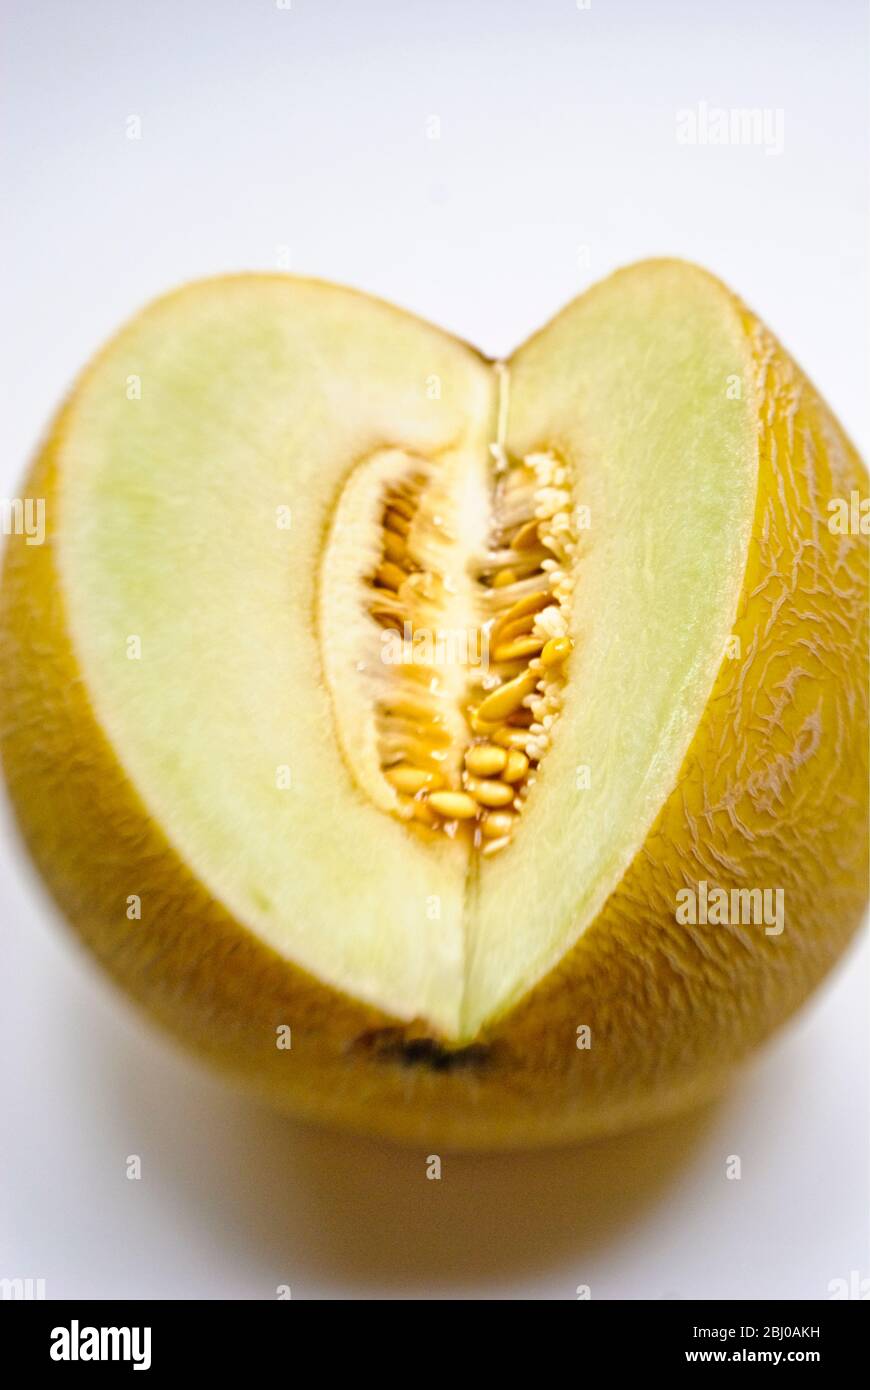 Cut face of galia melon showing flesh and seeds in interior - Stock Photo